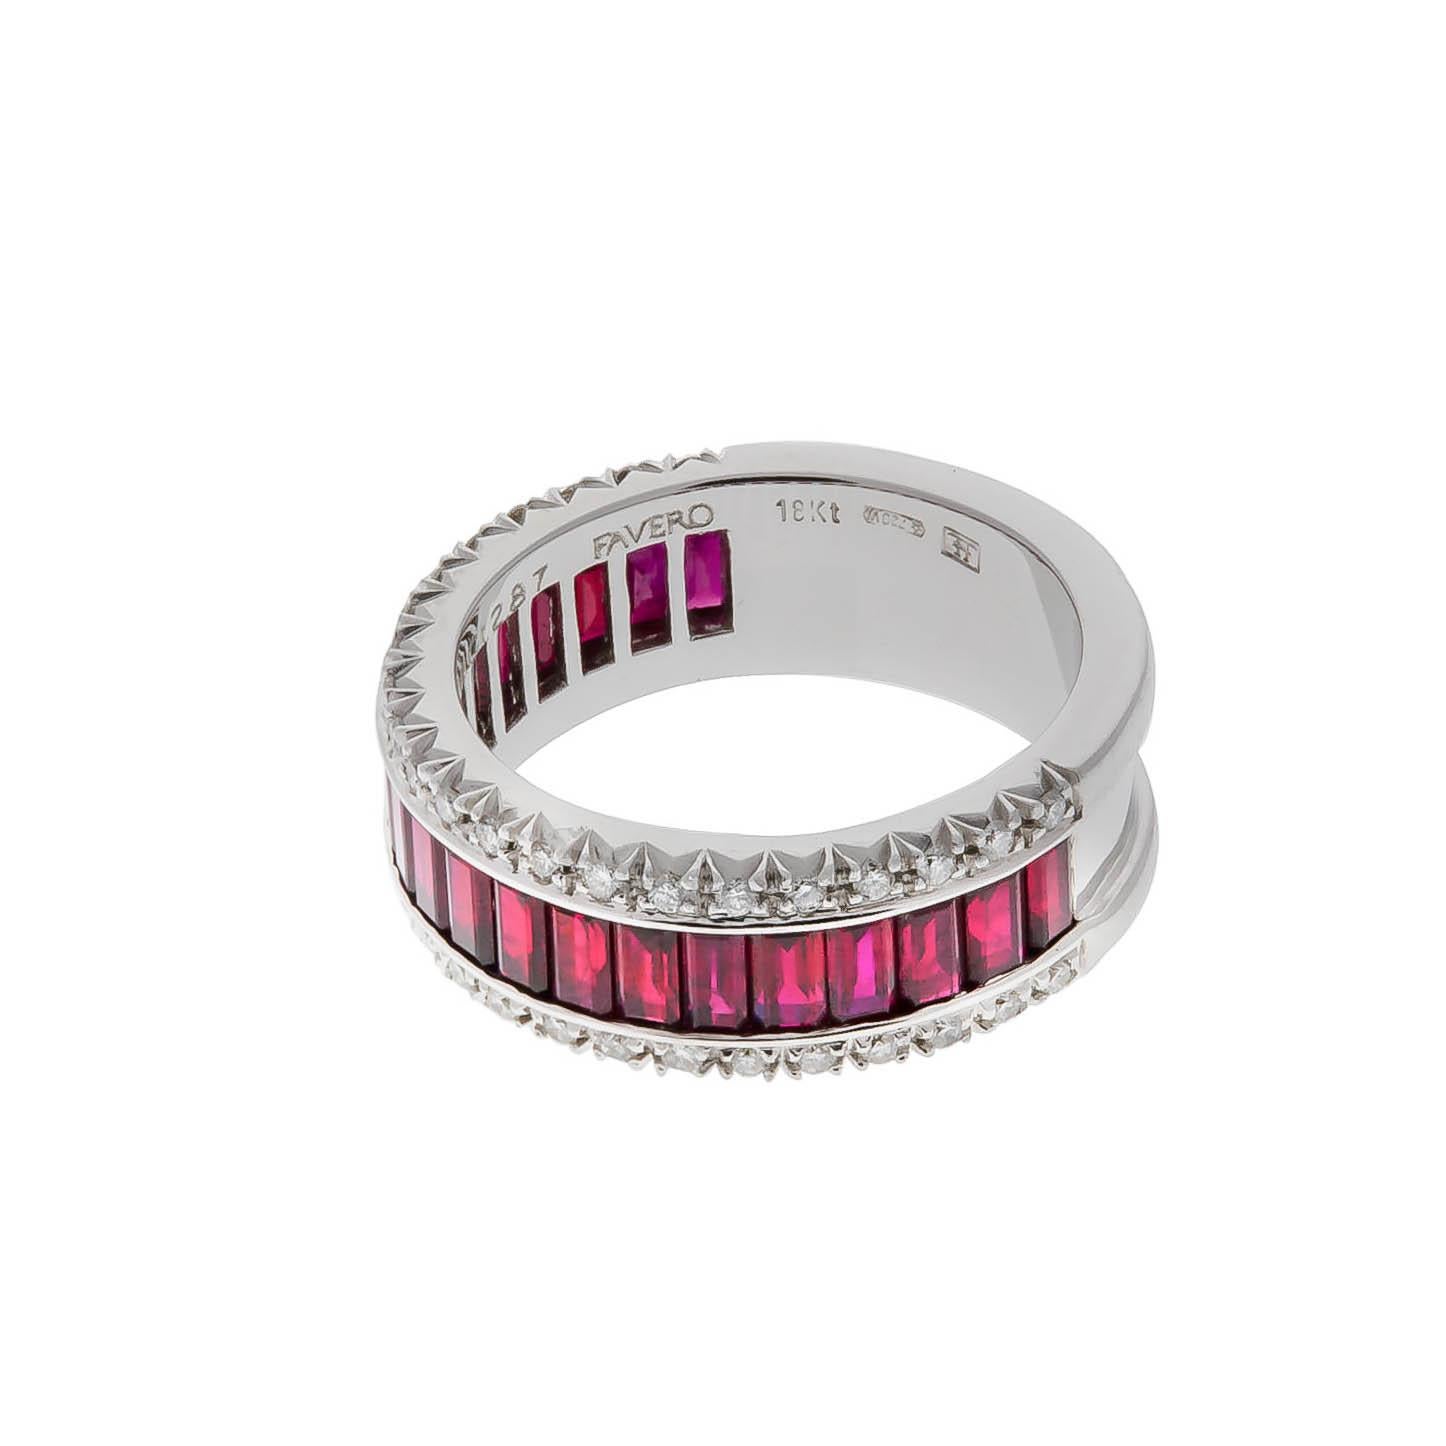 Favero 18K white gold band containing emerald cut rubies weighing combined 2.87 carats and round diamonds weighing combined 0.30 carat.
Size 6 1/2. Can be sized.